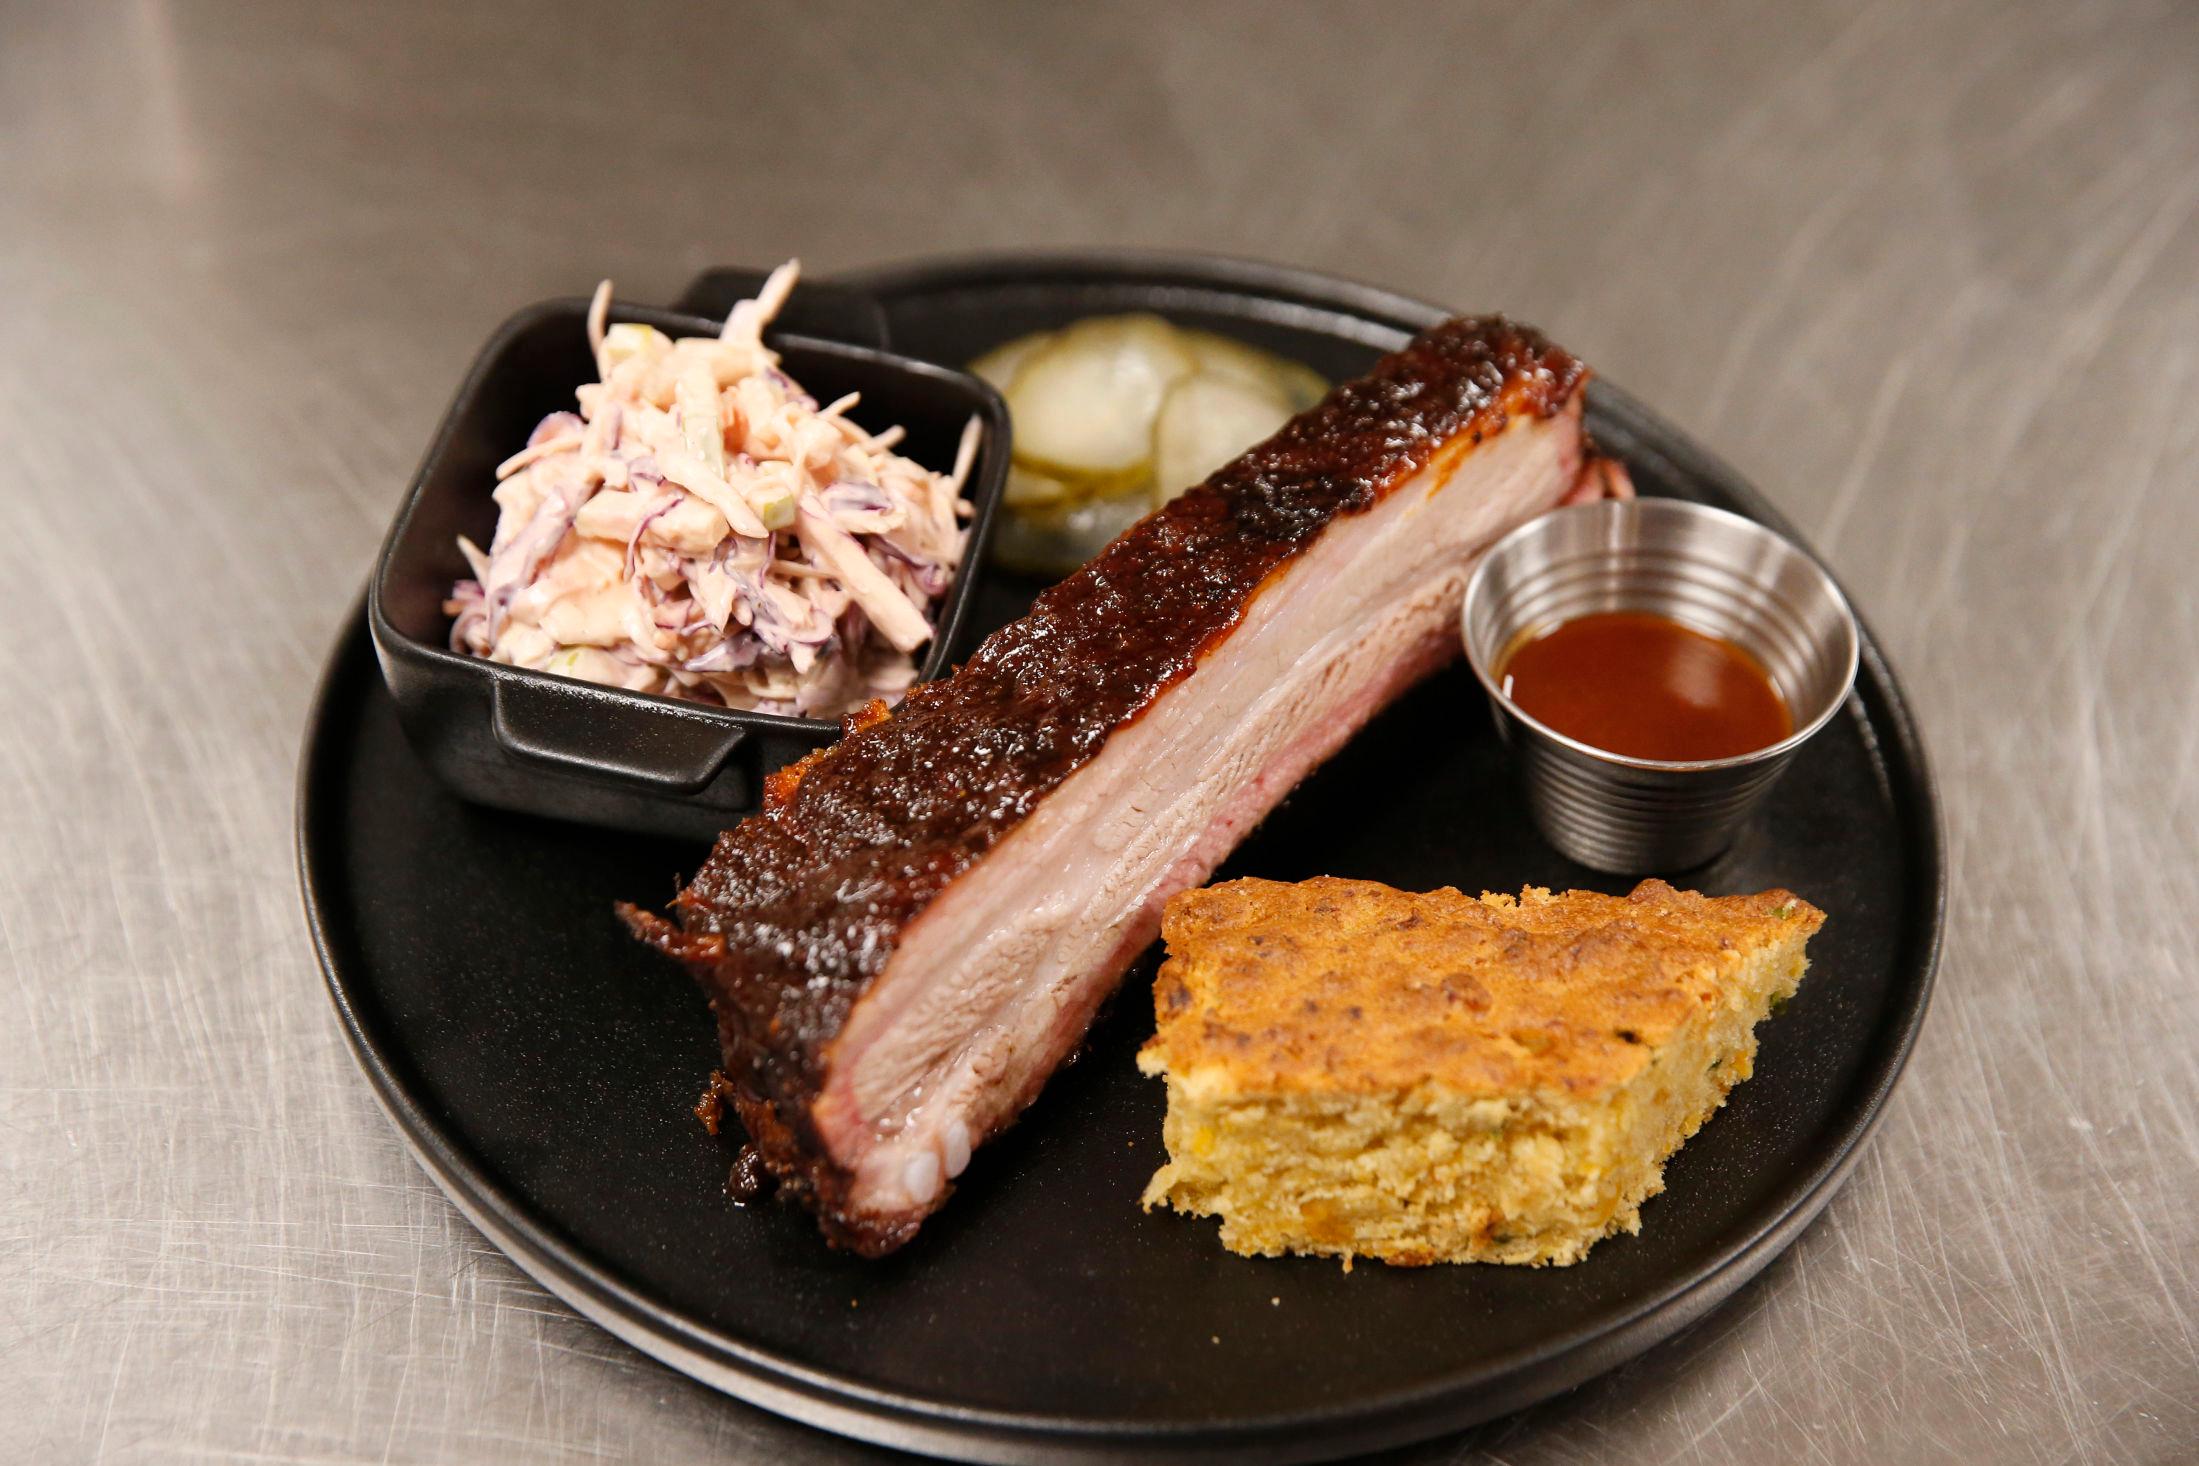 BARBECUE: Her ses 250 grams pork ribs. Foto: Trond Solberg/VG